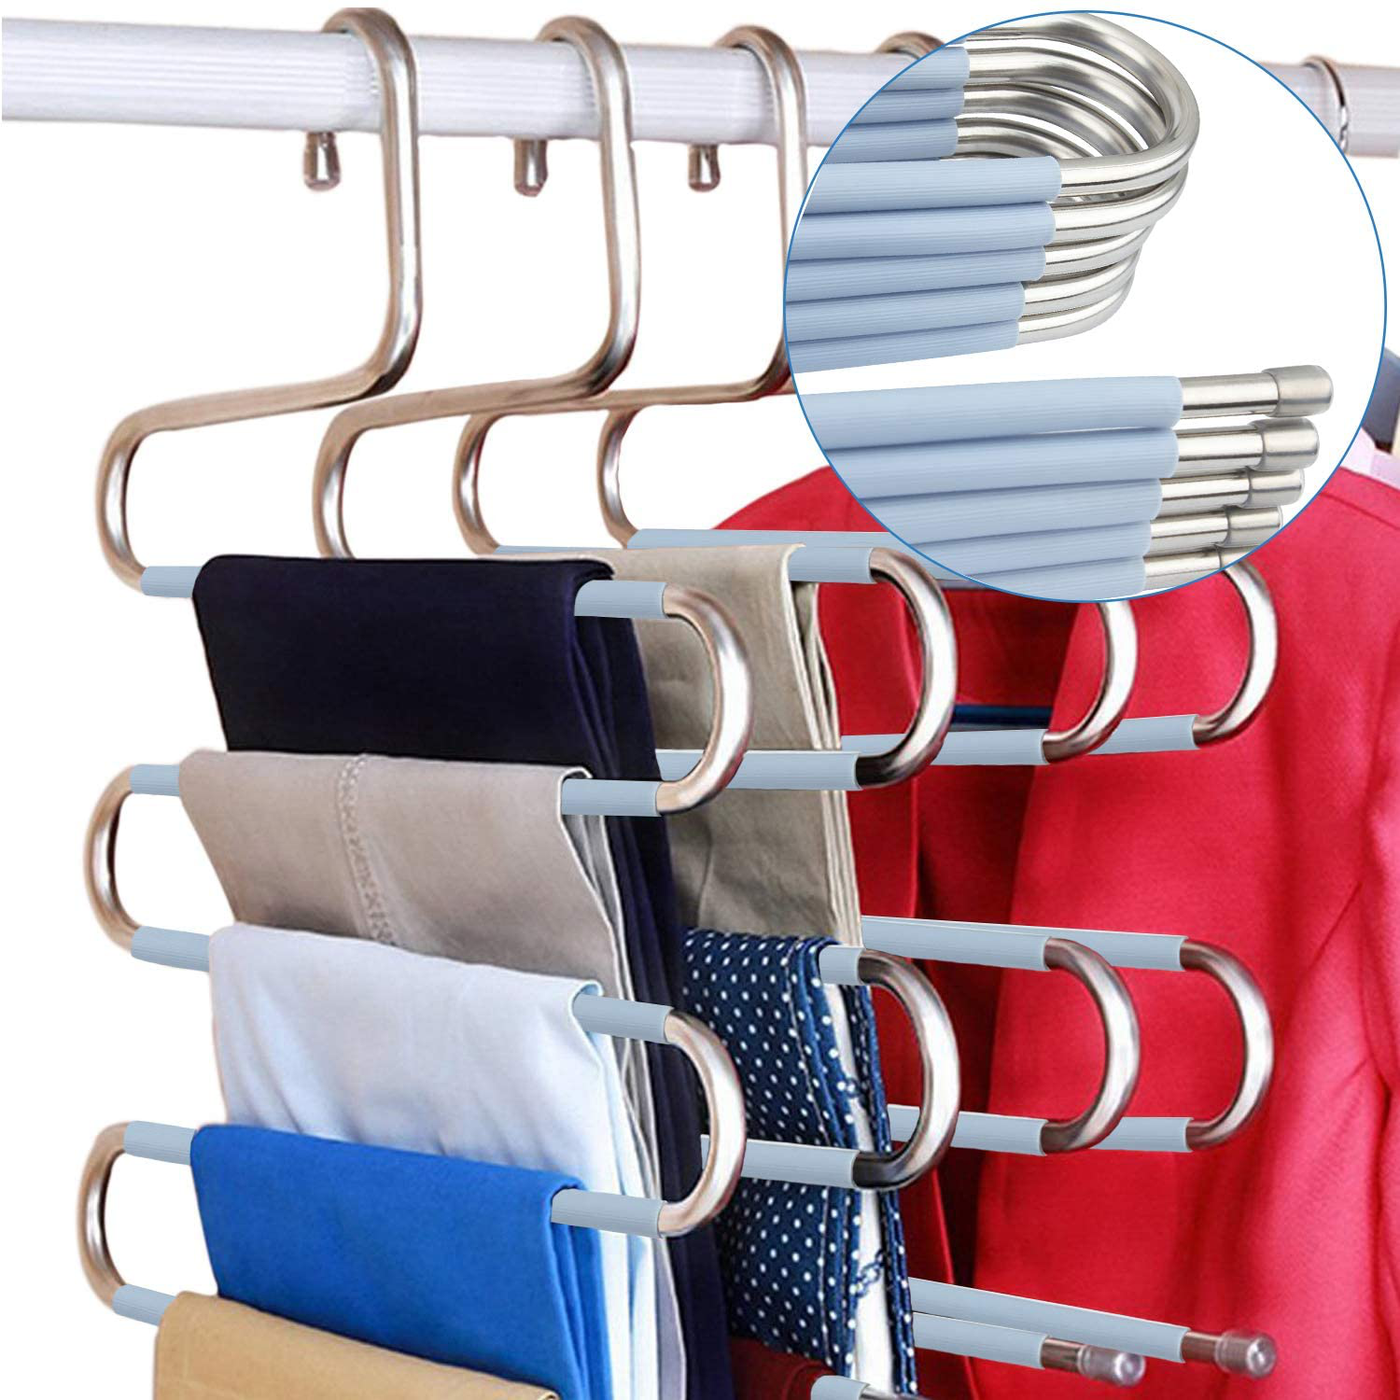 DOIOWN S-Type Stainless Steel Clothes Pants Hangers Closet Storage Organizer for Pants Jeans Scarf Hanging (14.17 x 14.96ins, Set of 3) (5-Pieces-Light Blue(Upgrade Style))